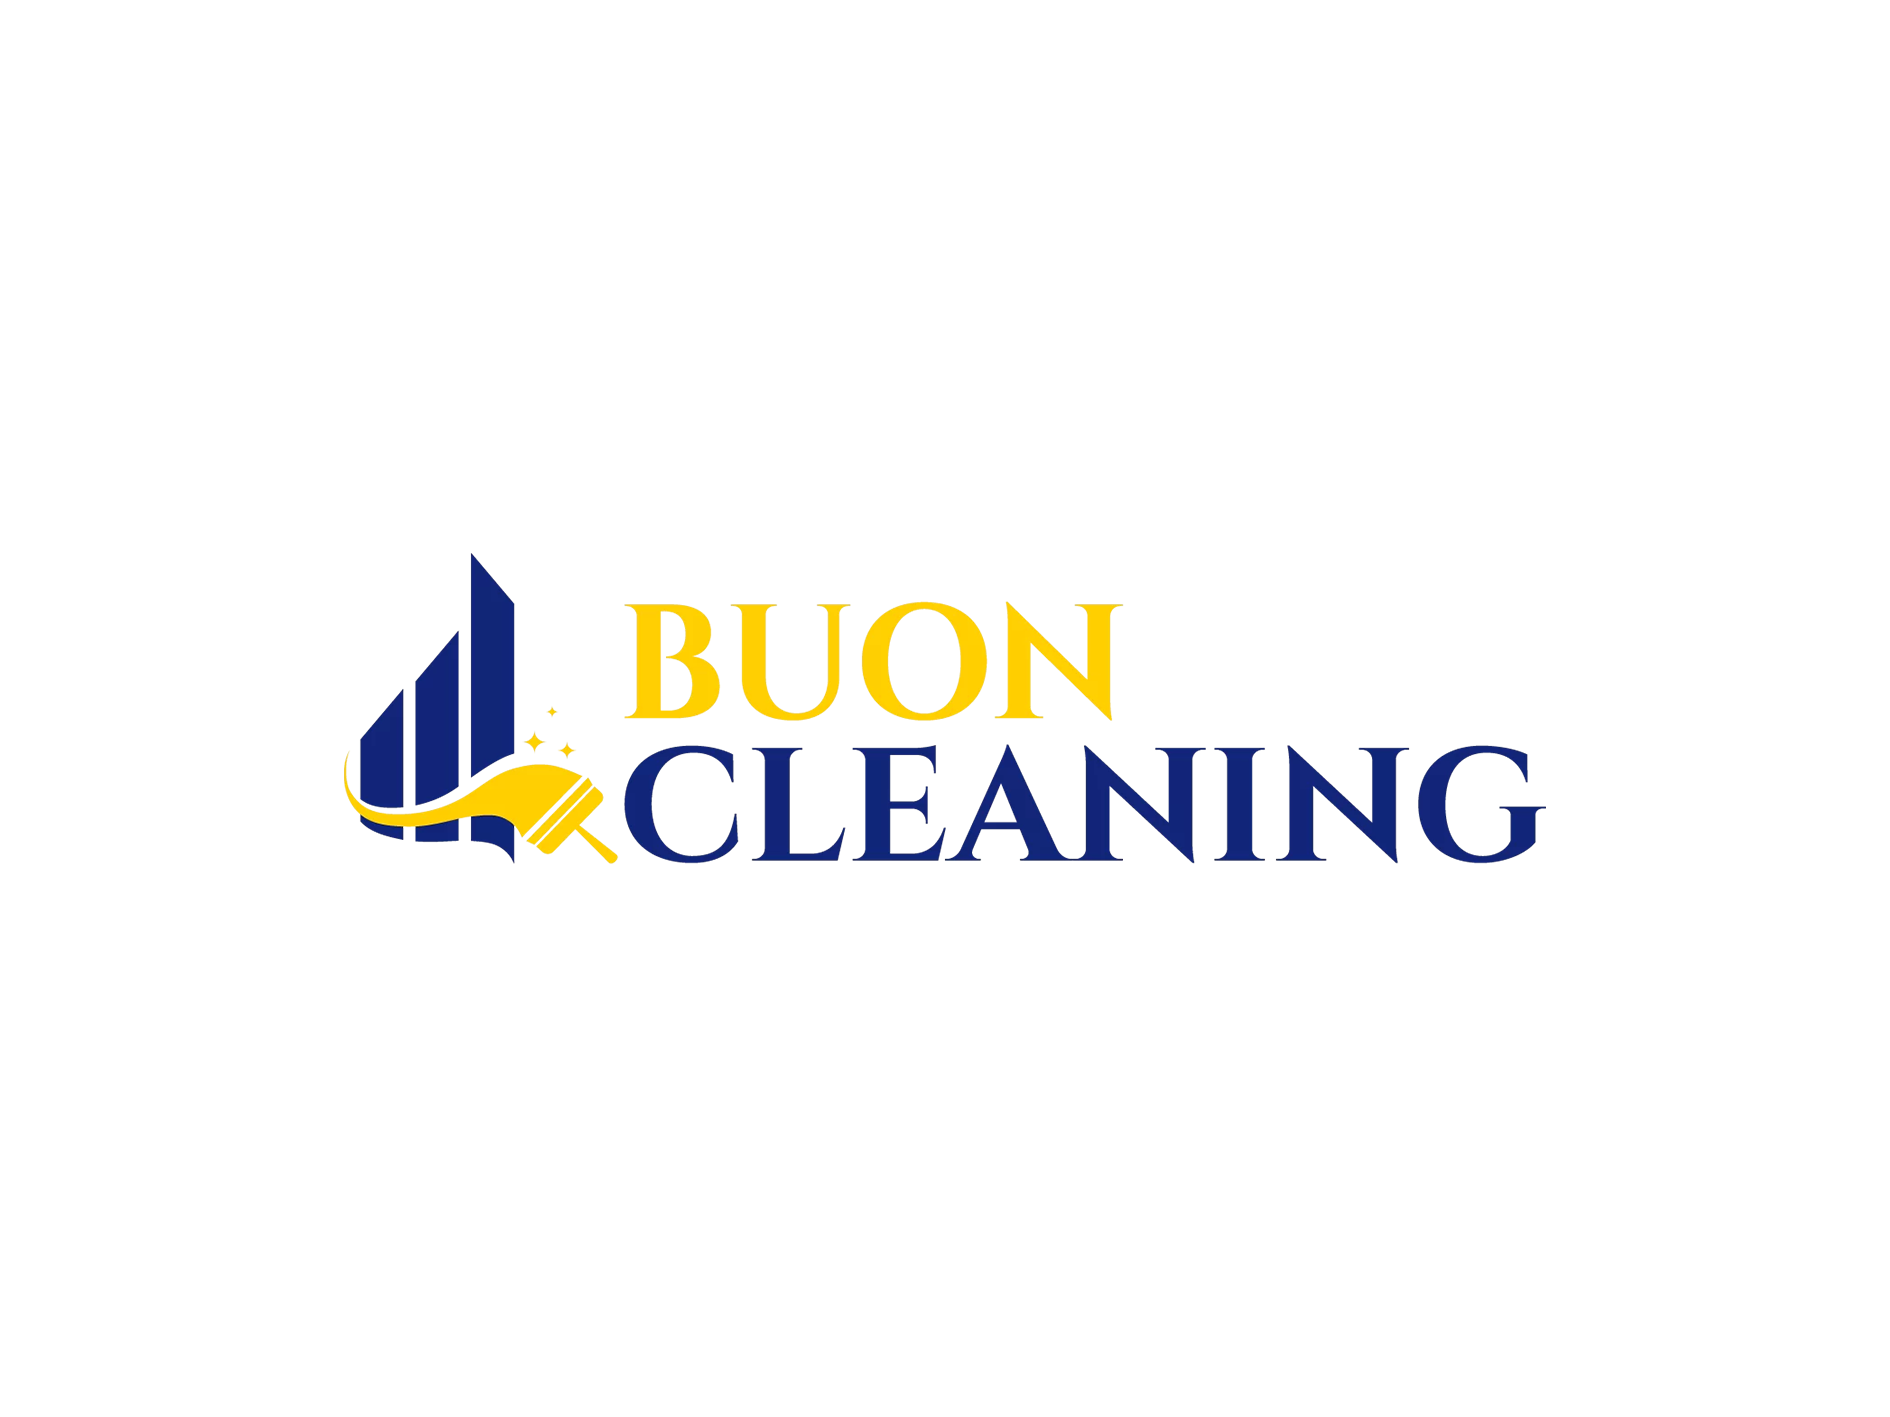 Buon Cleaning